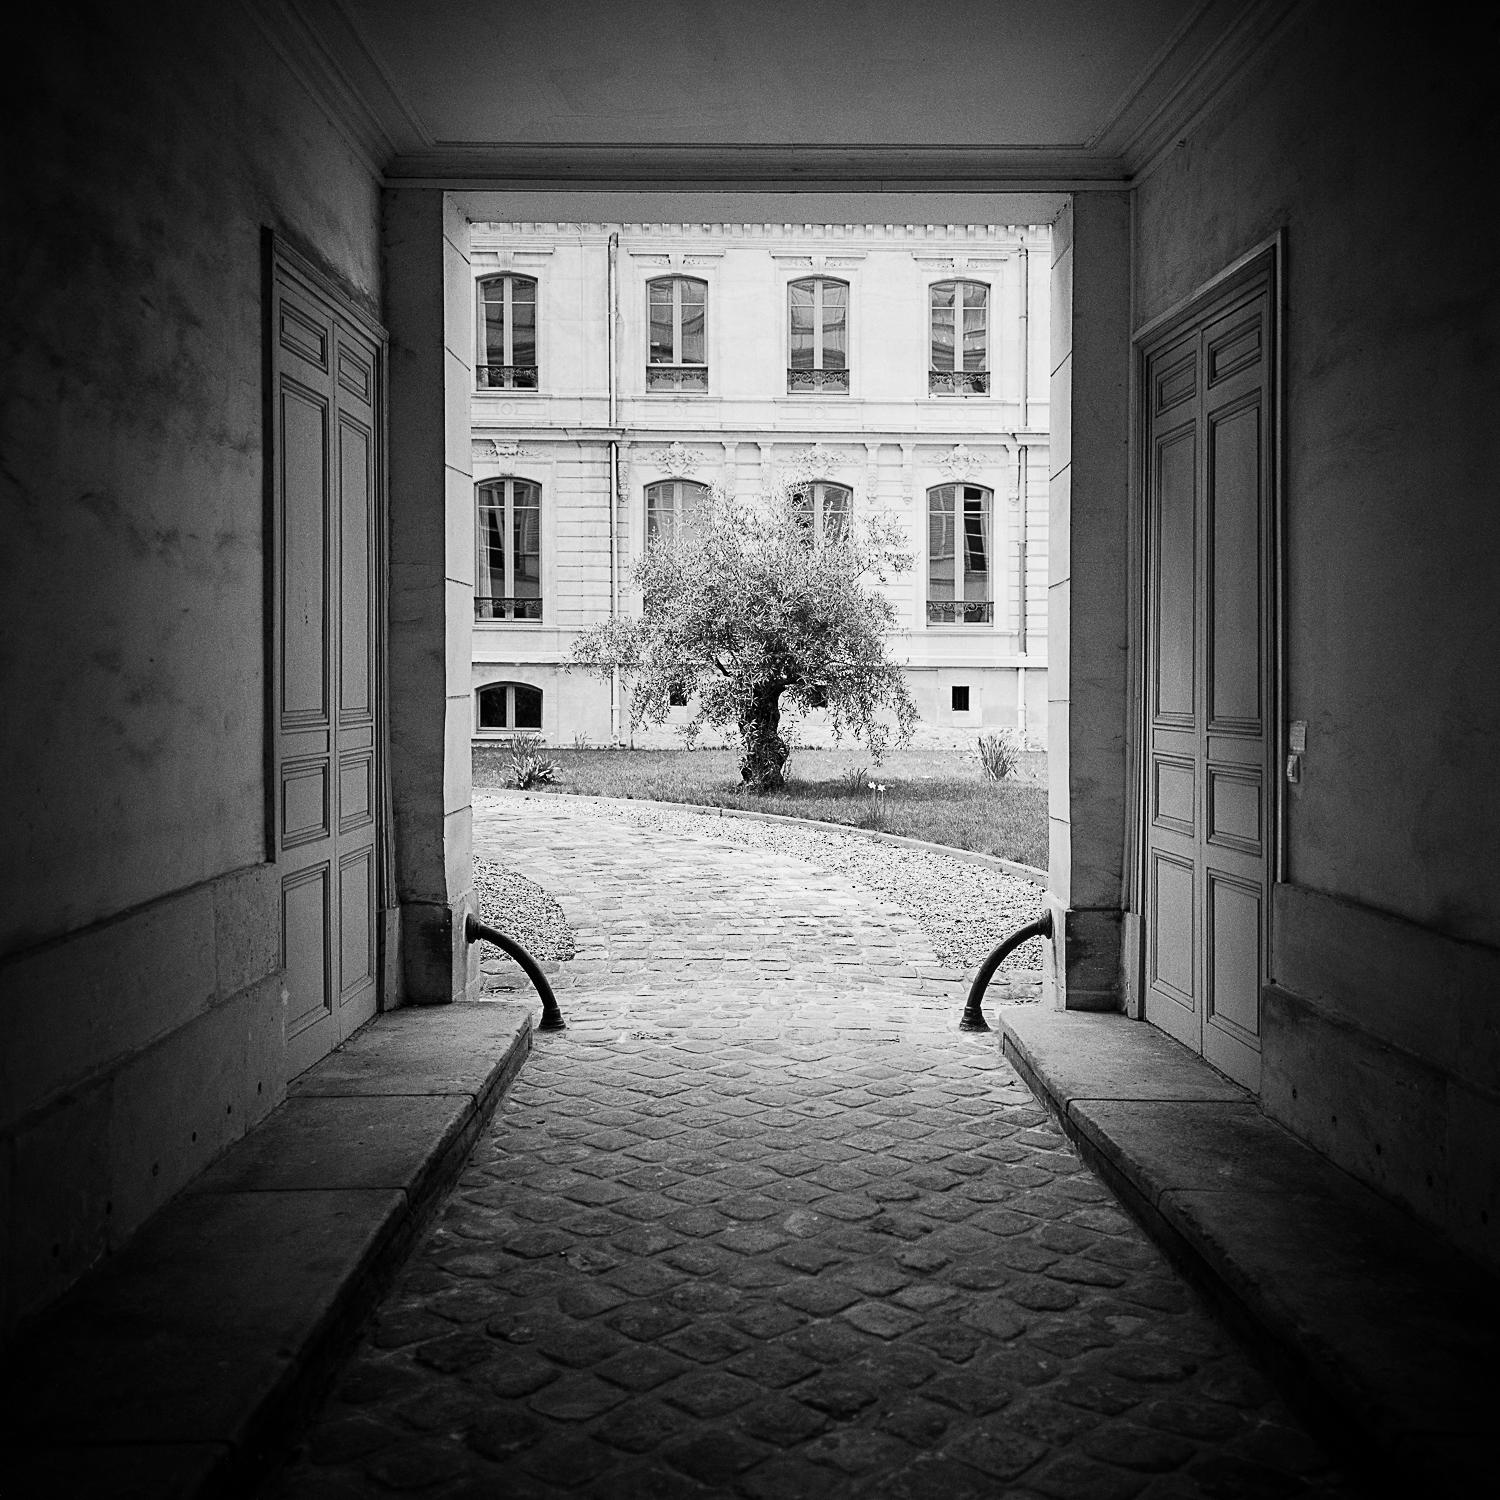 Tree in the Courtyard, Paris, black and white photography, pigment print, framed - Photograph by Gerald Berghammer